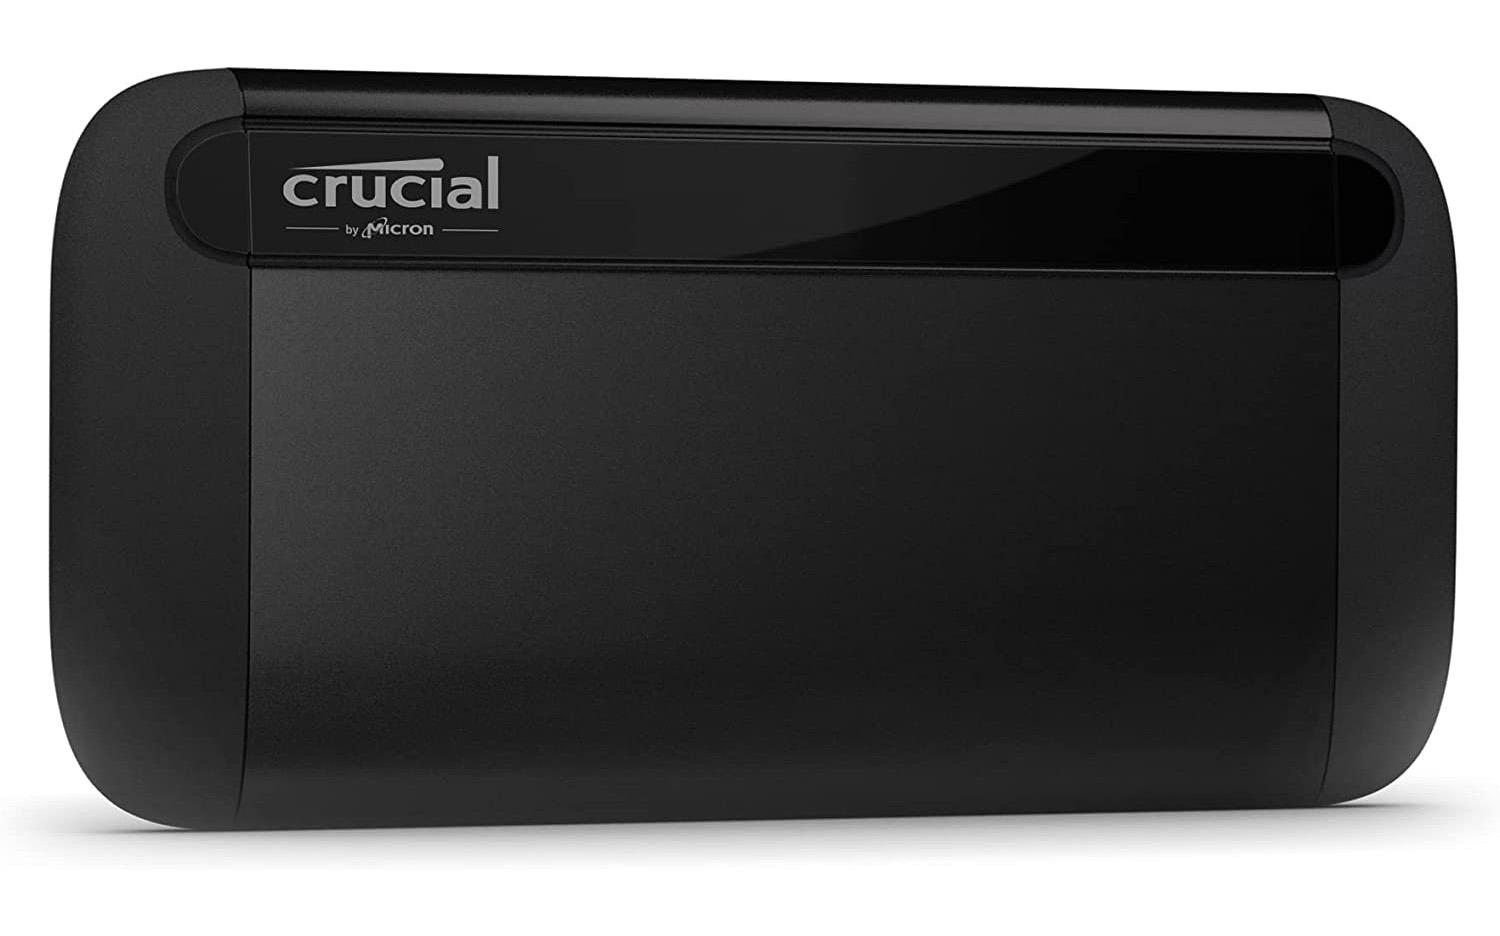 Crucial X8 1TB Portable SSD USB 3.2 External Solid State Drive for $47.99 Shipped